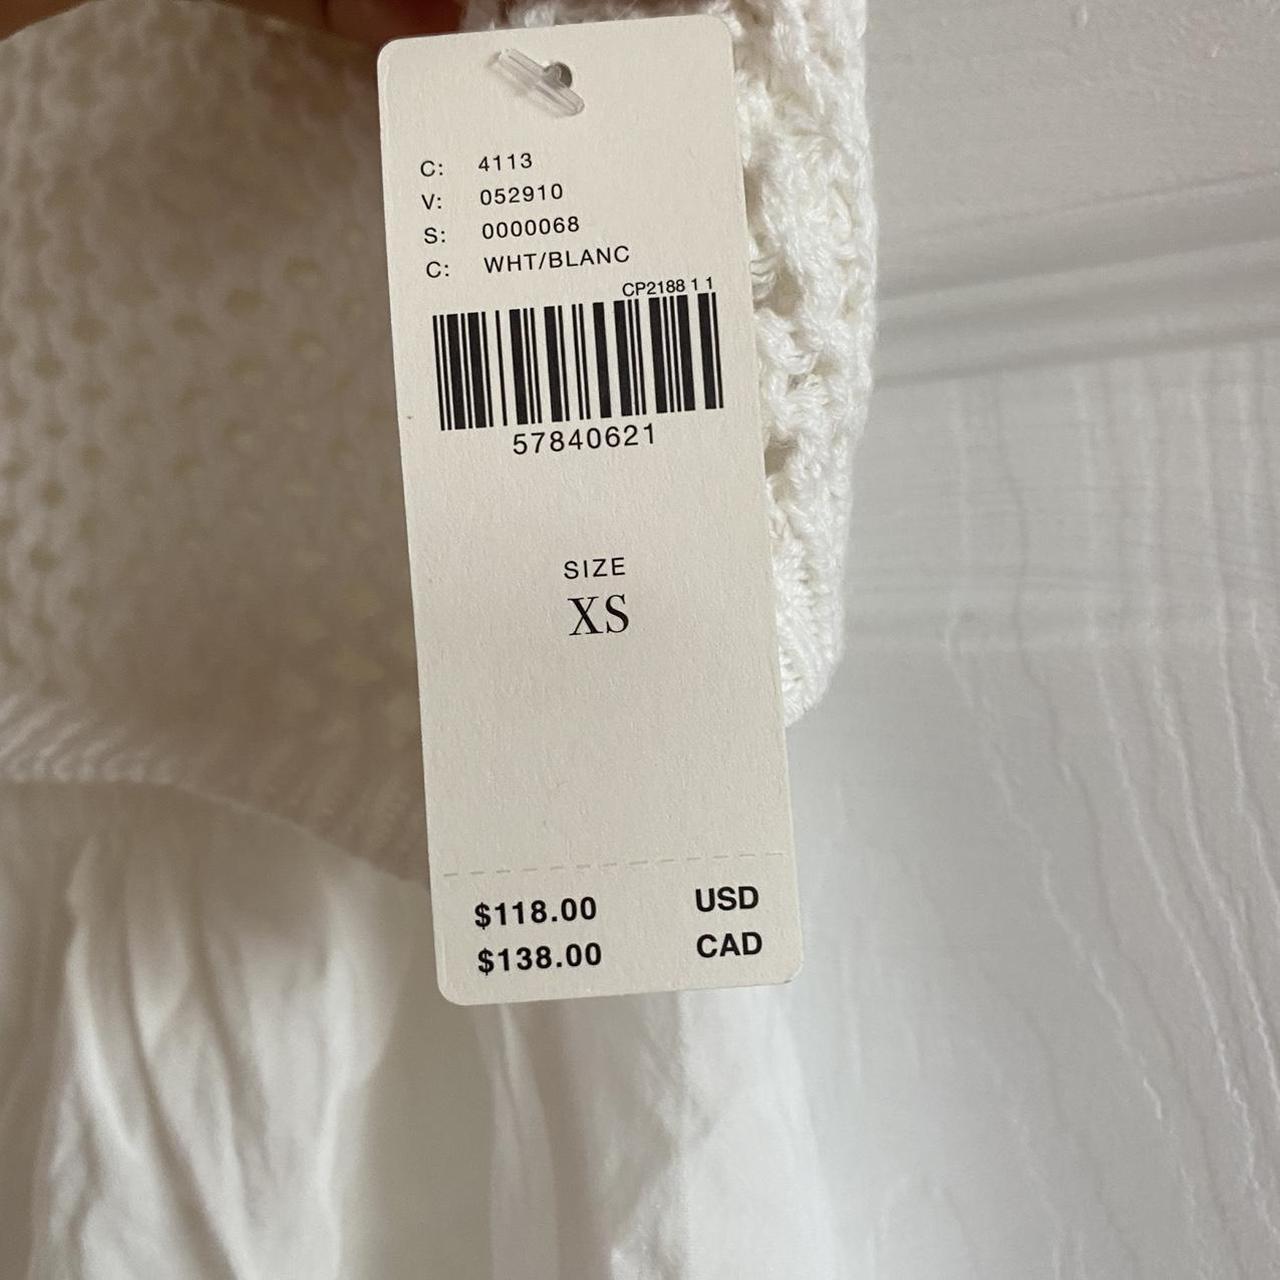 Product Image 2 - Anthropologie XS top

Was $118 US